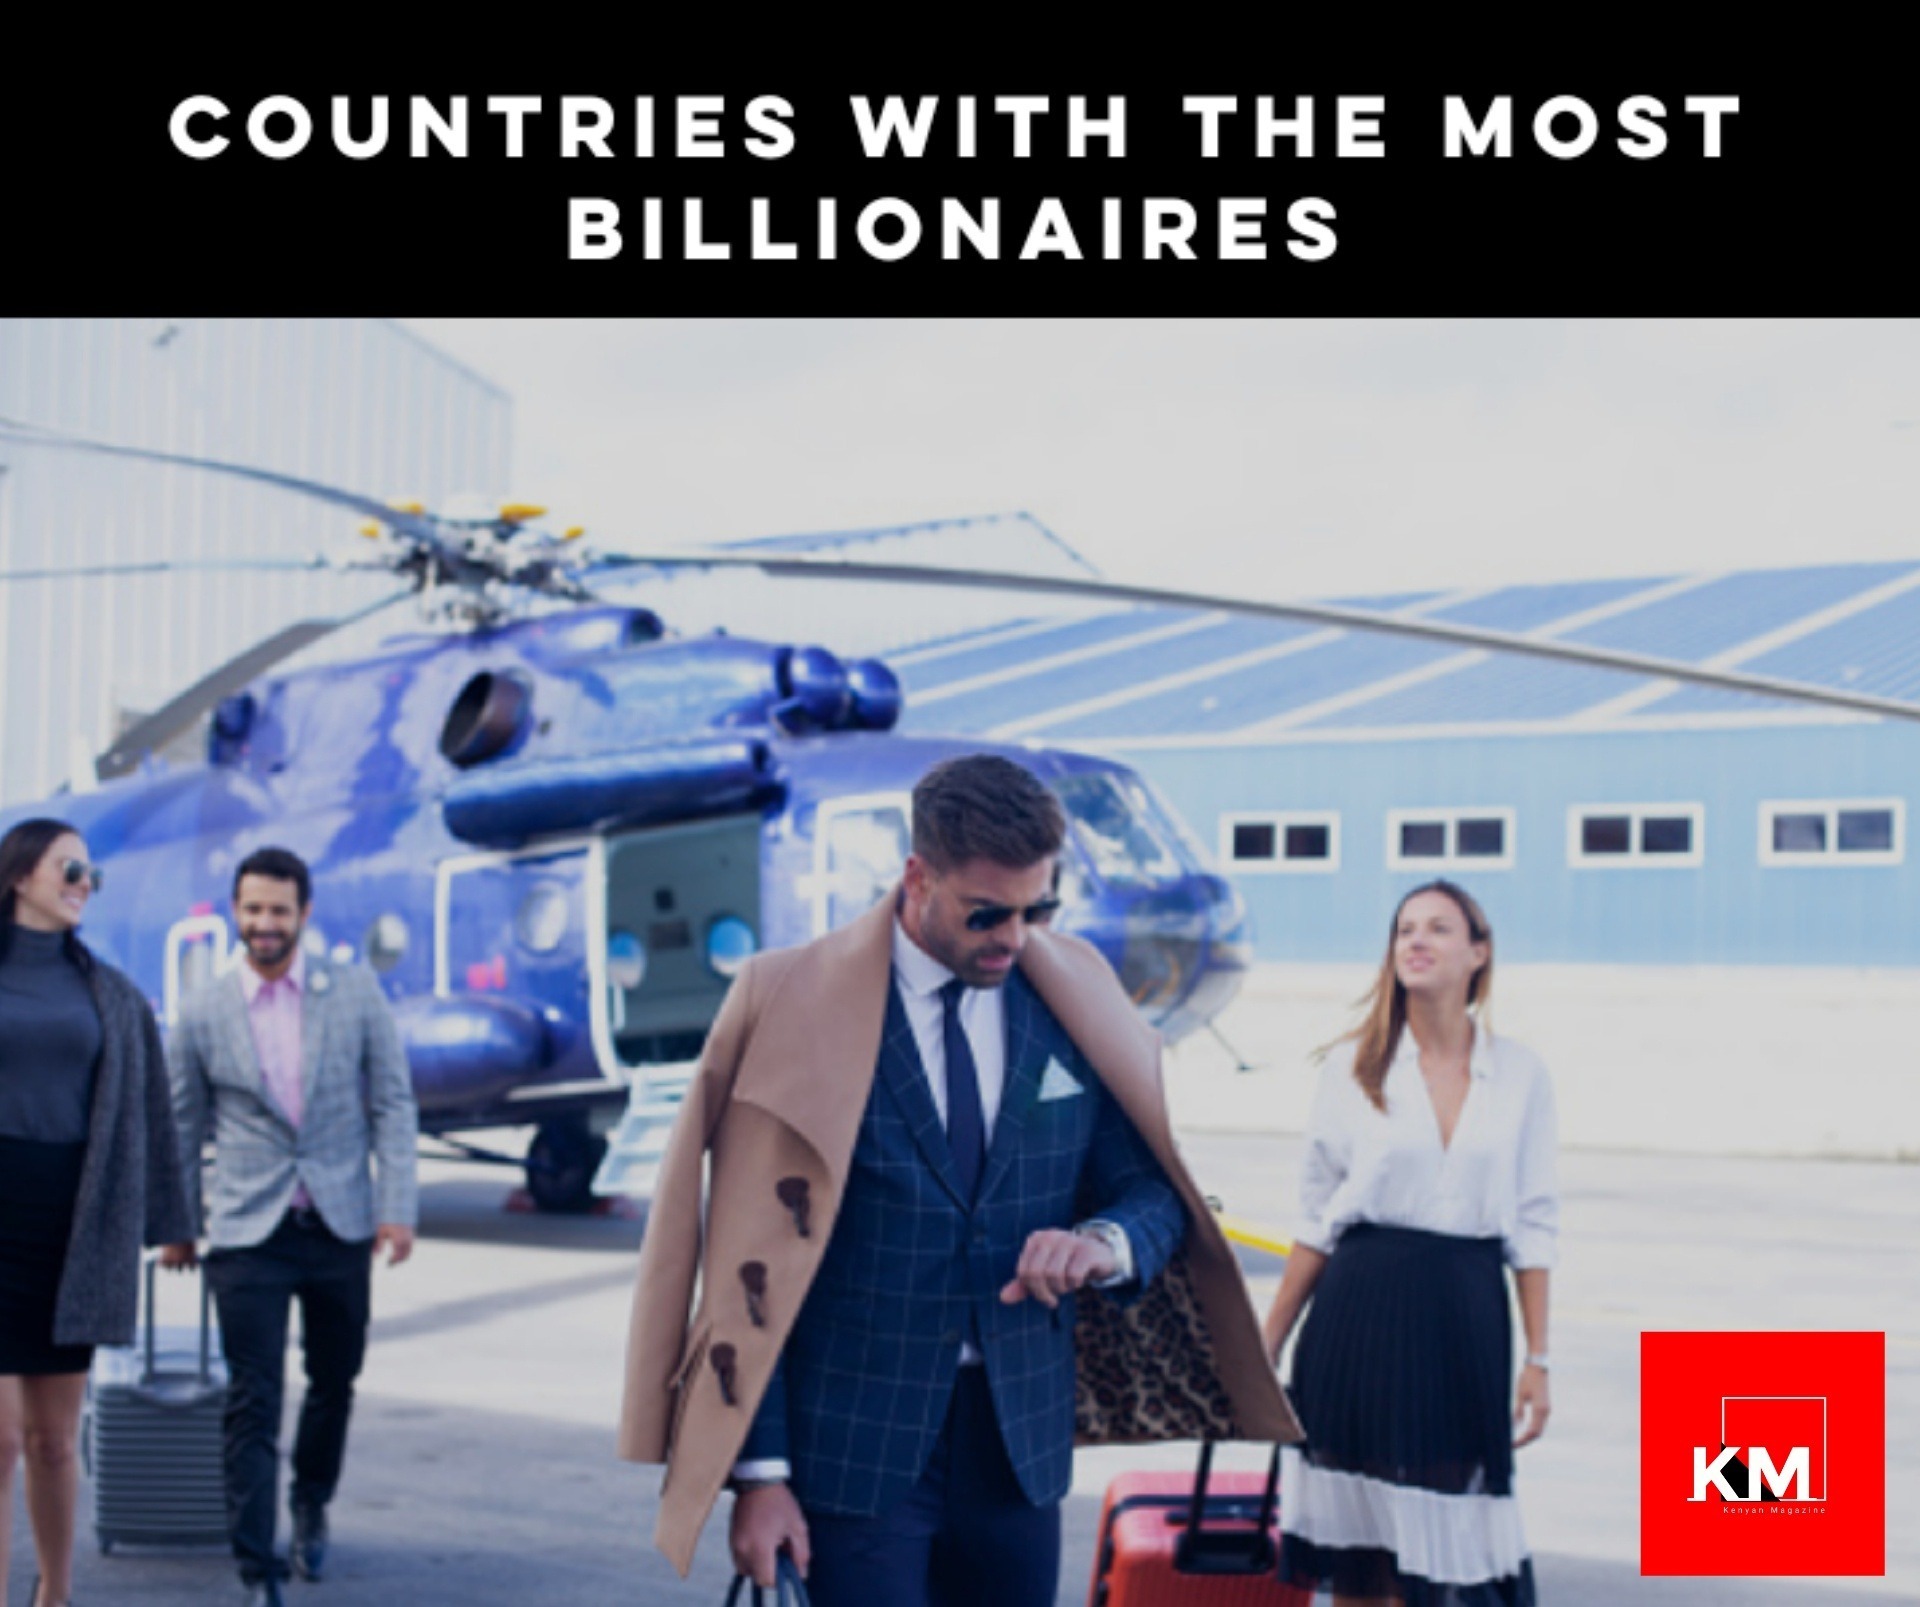 Billionaires by country